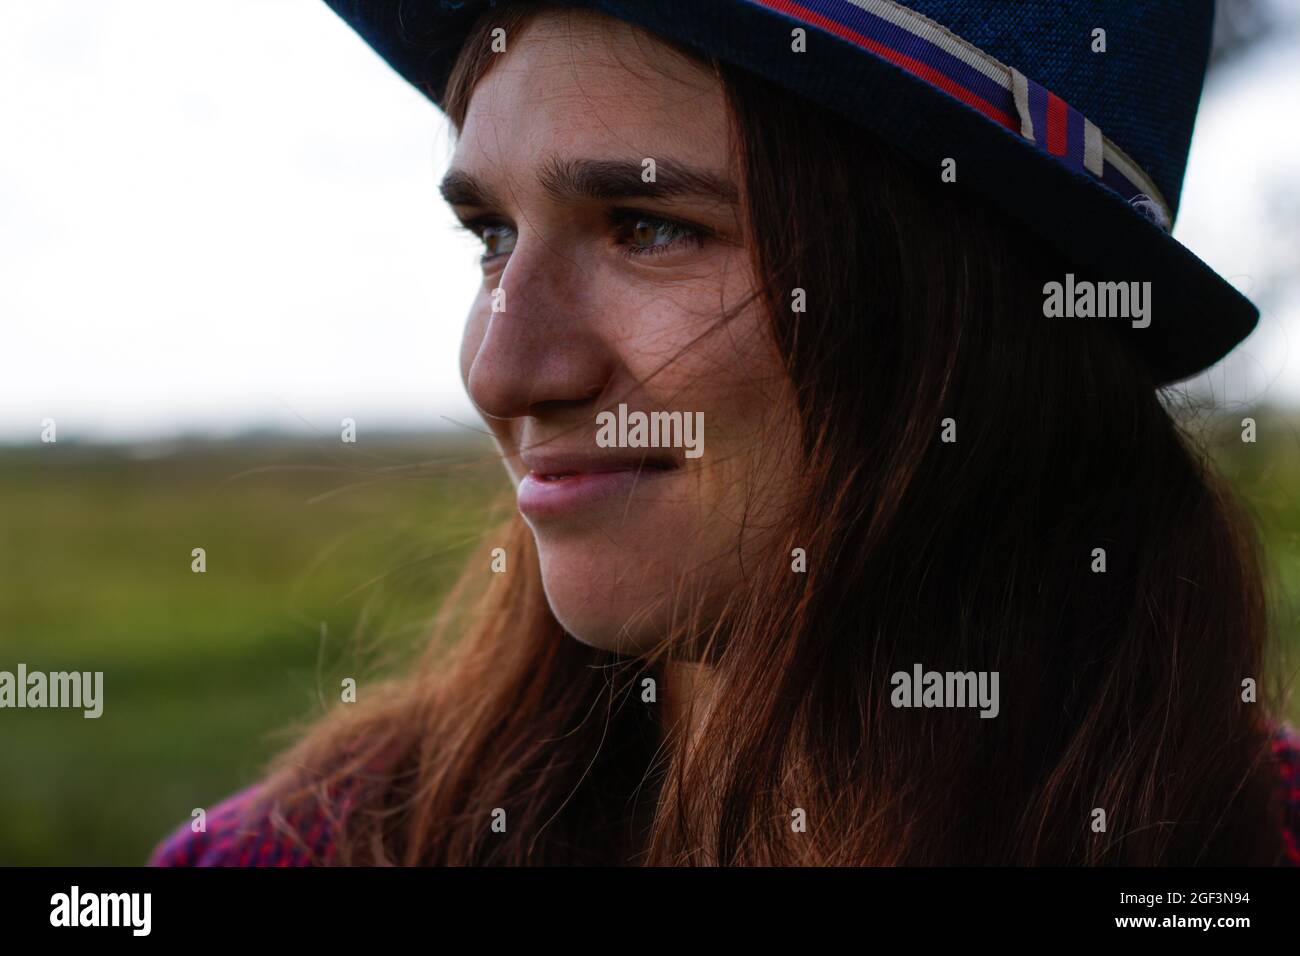 Defocus close-up portrait of a happy young woman with brown hair wearing a hat outdoors. Green nature background. Looking away. Out of focus Stock Photo